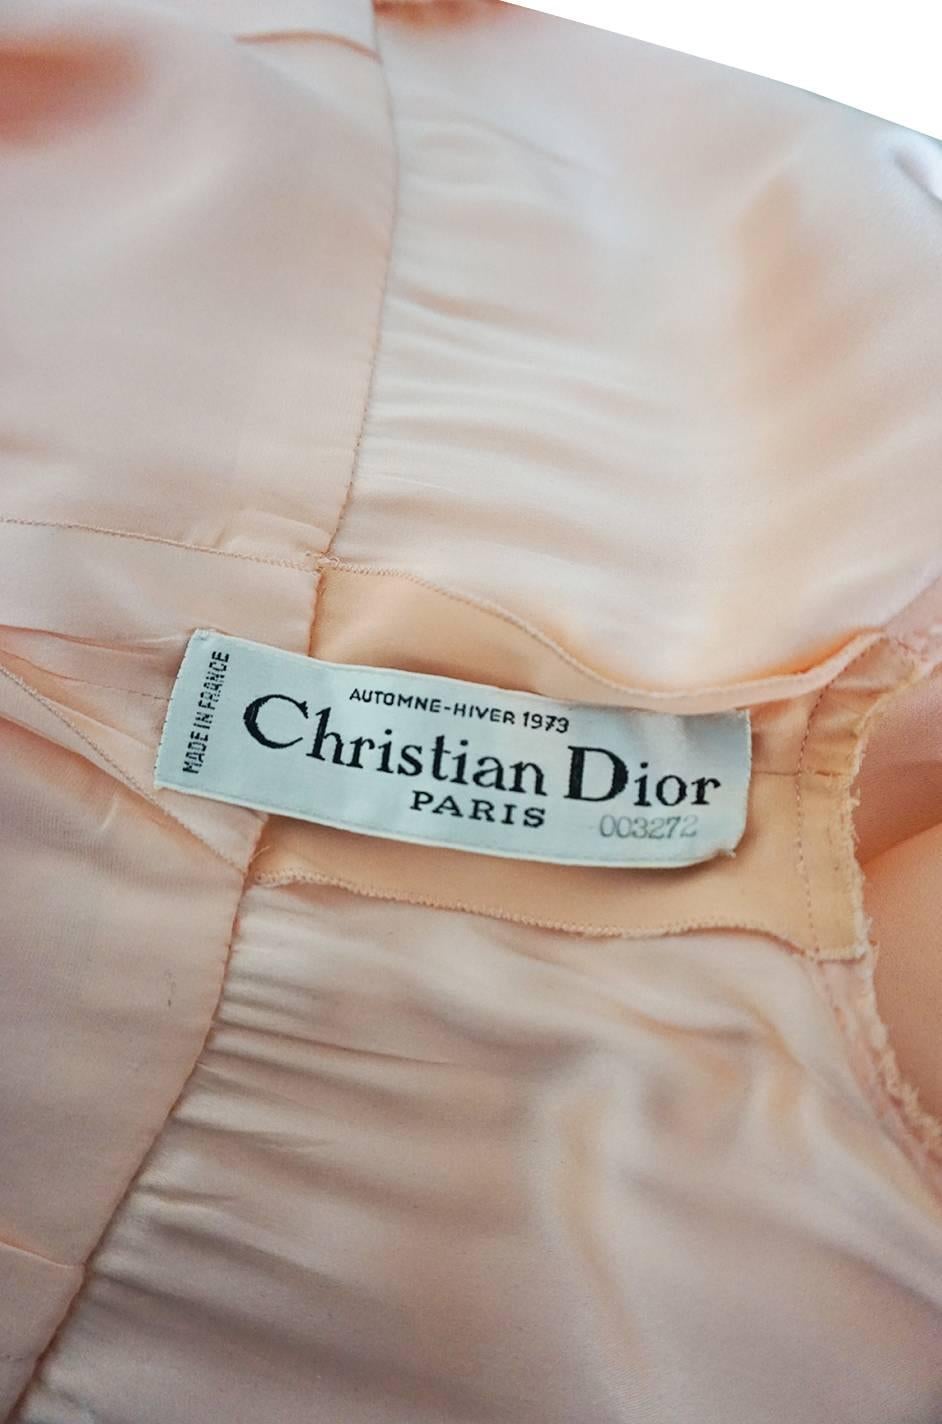 Christian Dior Haute Couture Intricately Pleated Silk Dress, A / W 1973  5